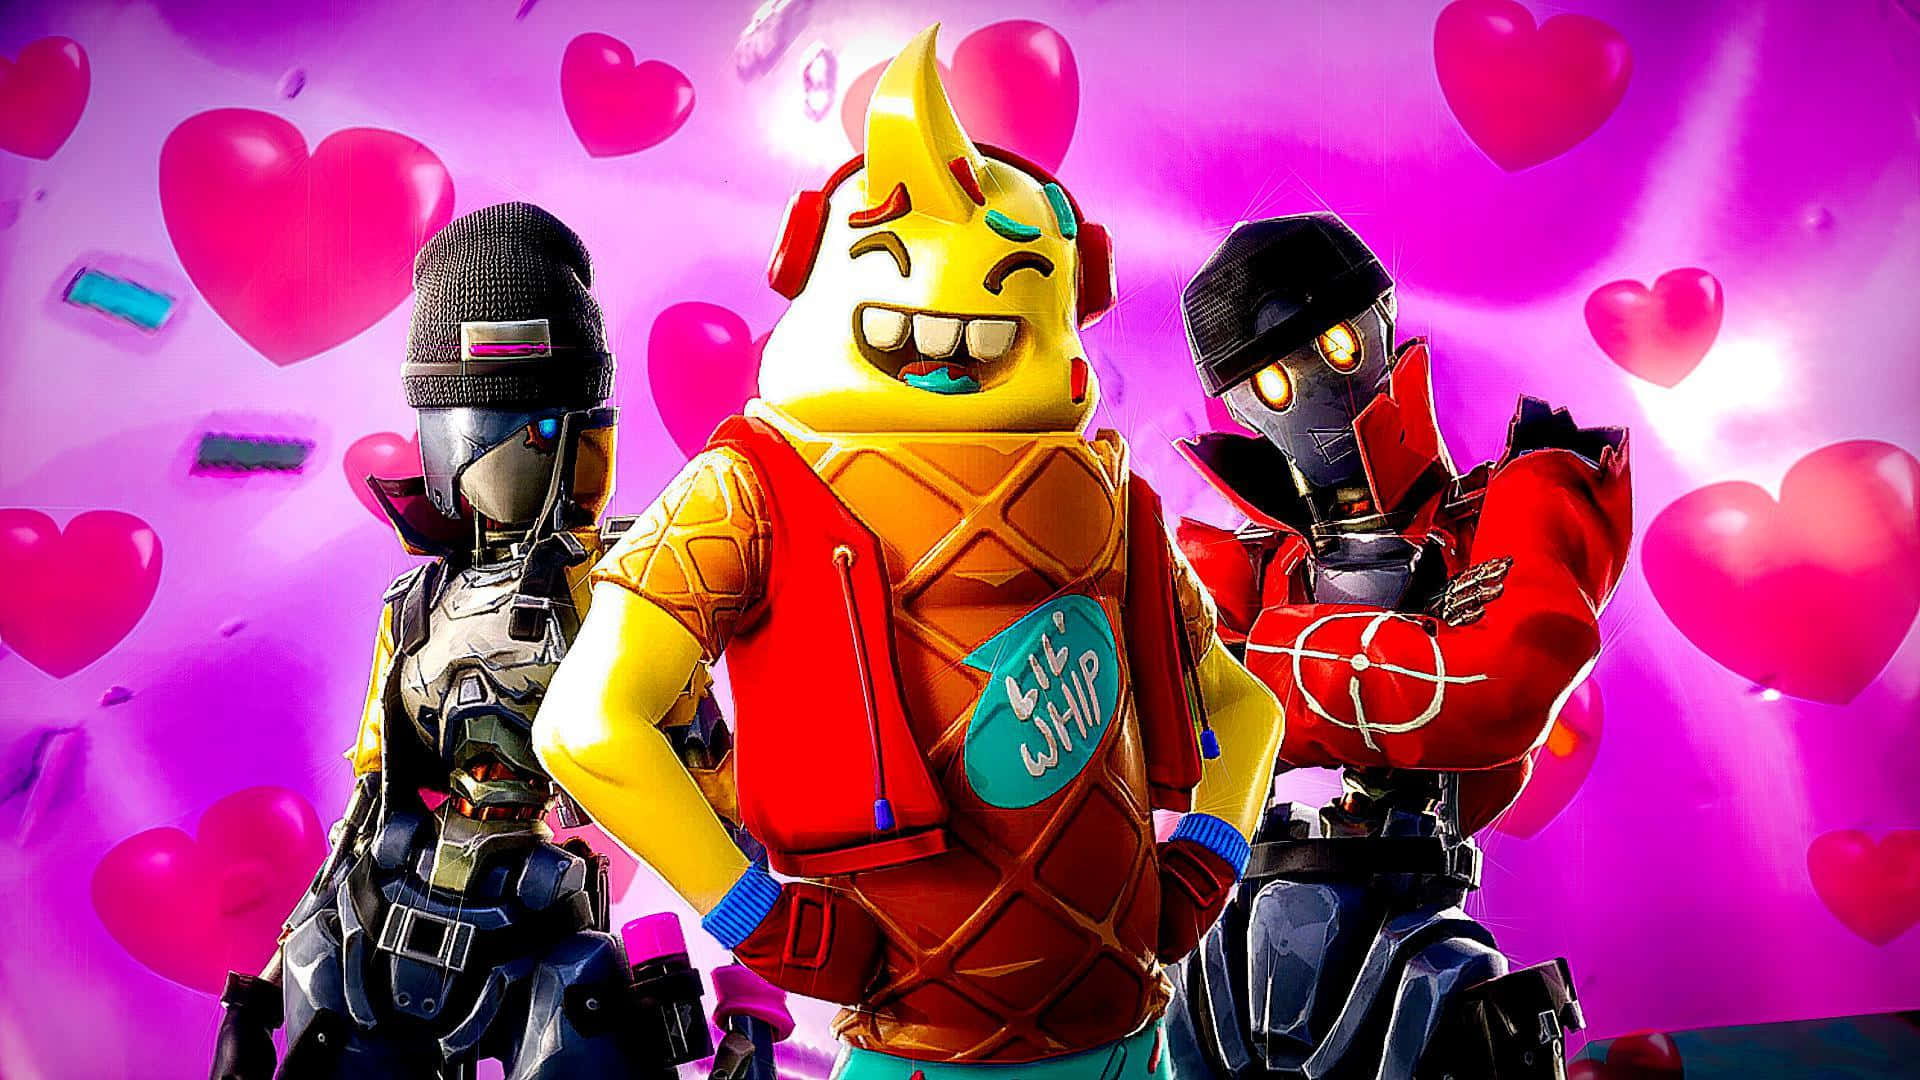 Chilling in the Battle Royale with Cute Fortnite! Wallpaper